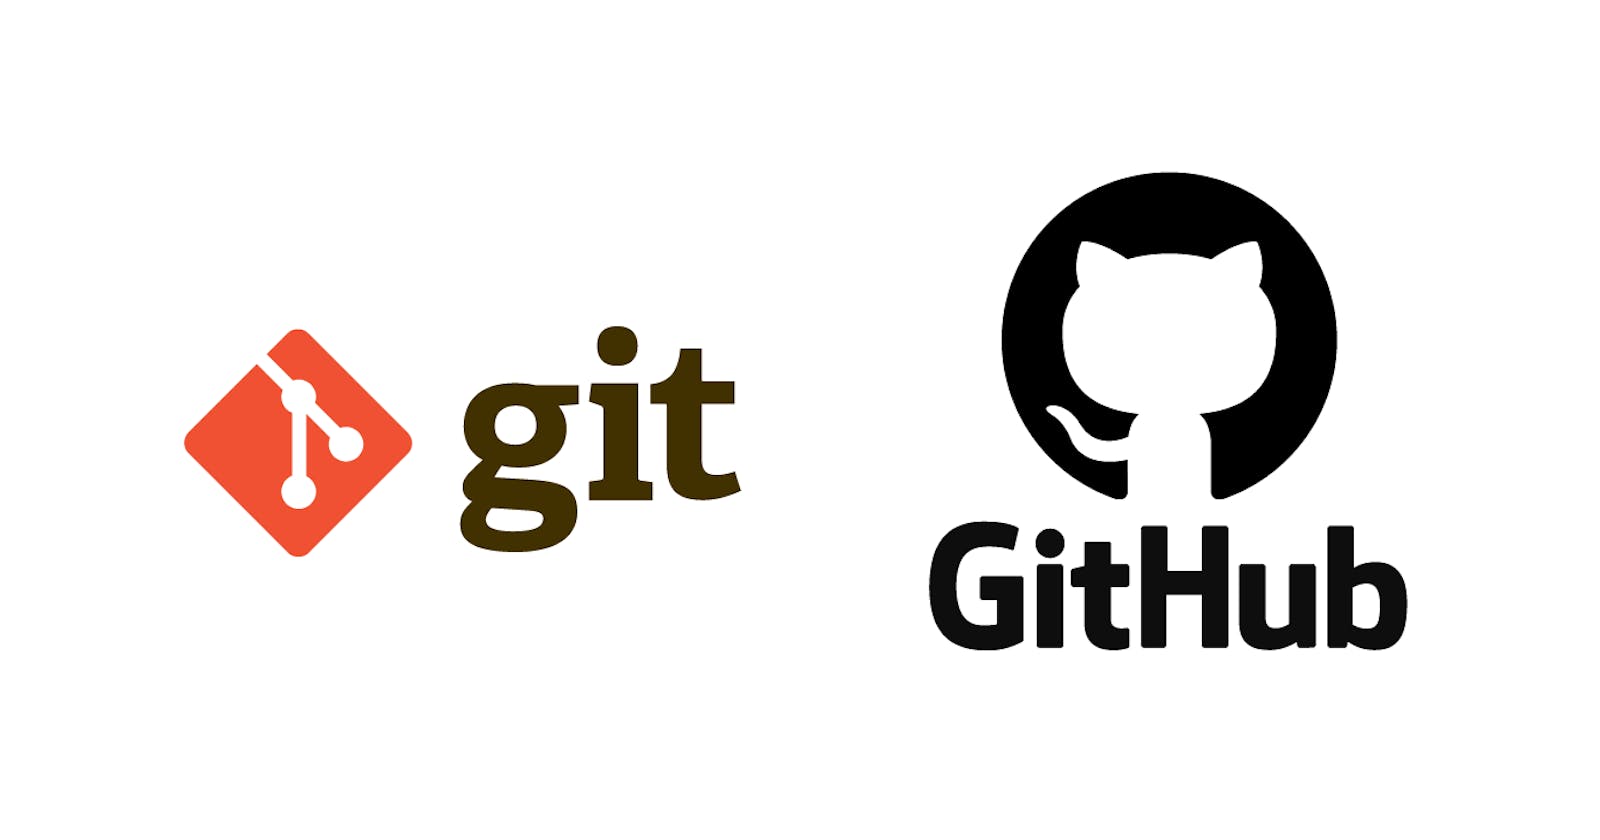 Install Git and try basic commands & workflows